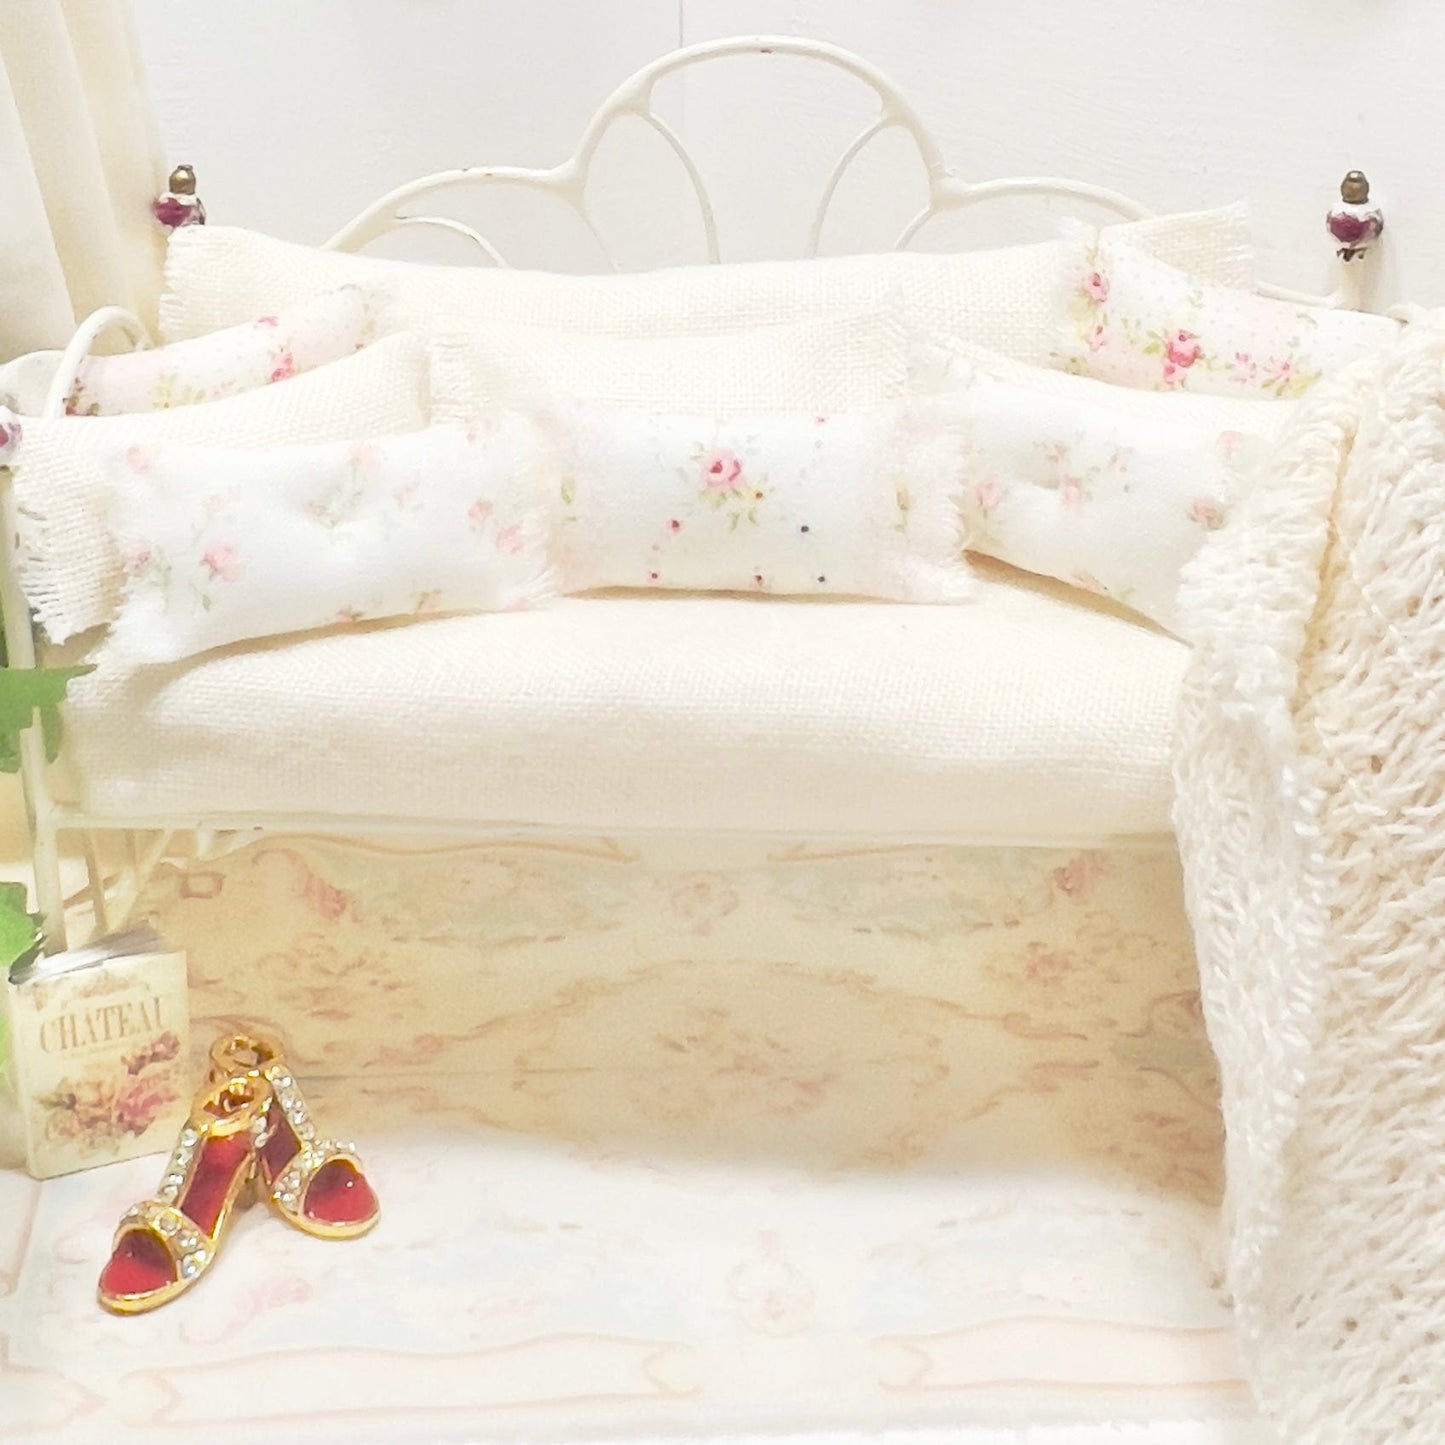 Chantallena Doll House Day Bed | Tea Dyed Linen wuth Petite Pink Roses 1:12 Scale Dollhouse Set | Floral Vintage Cream5